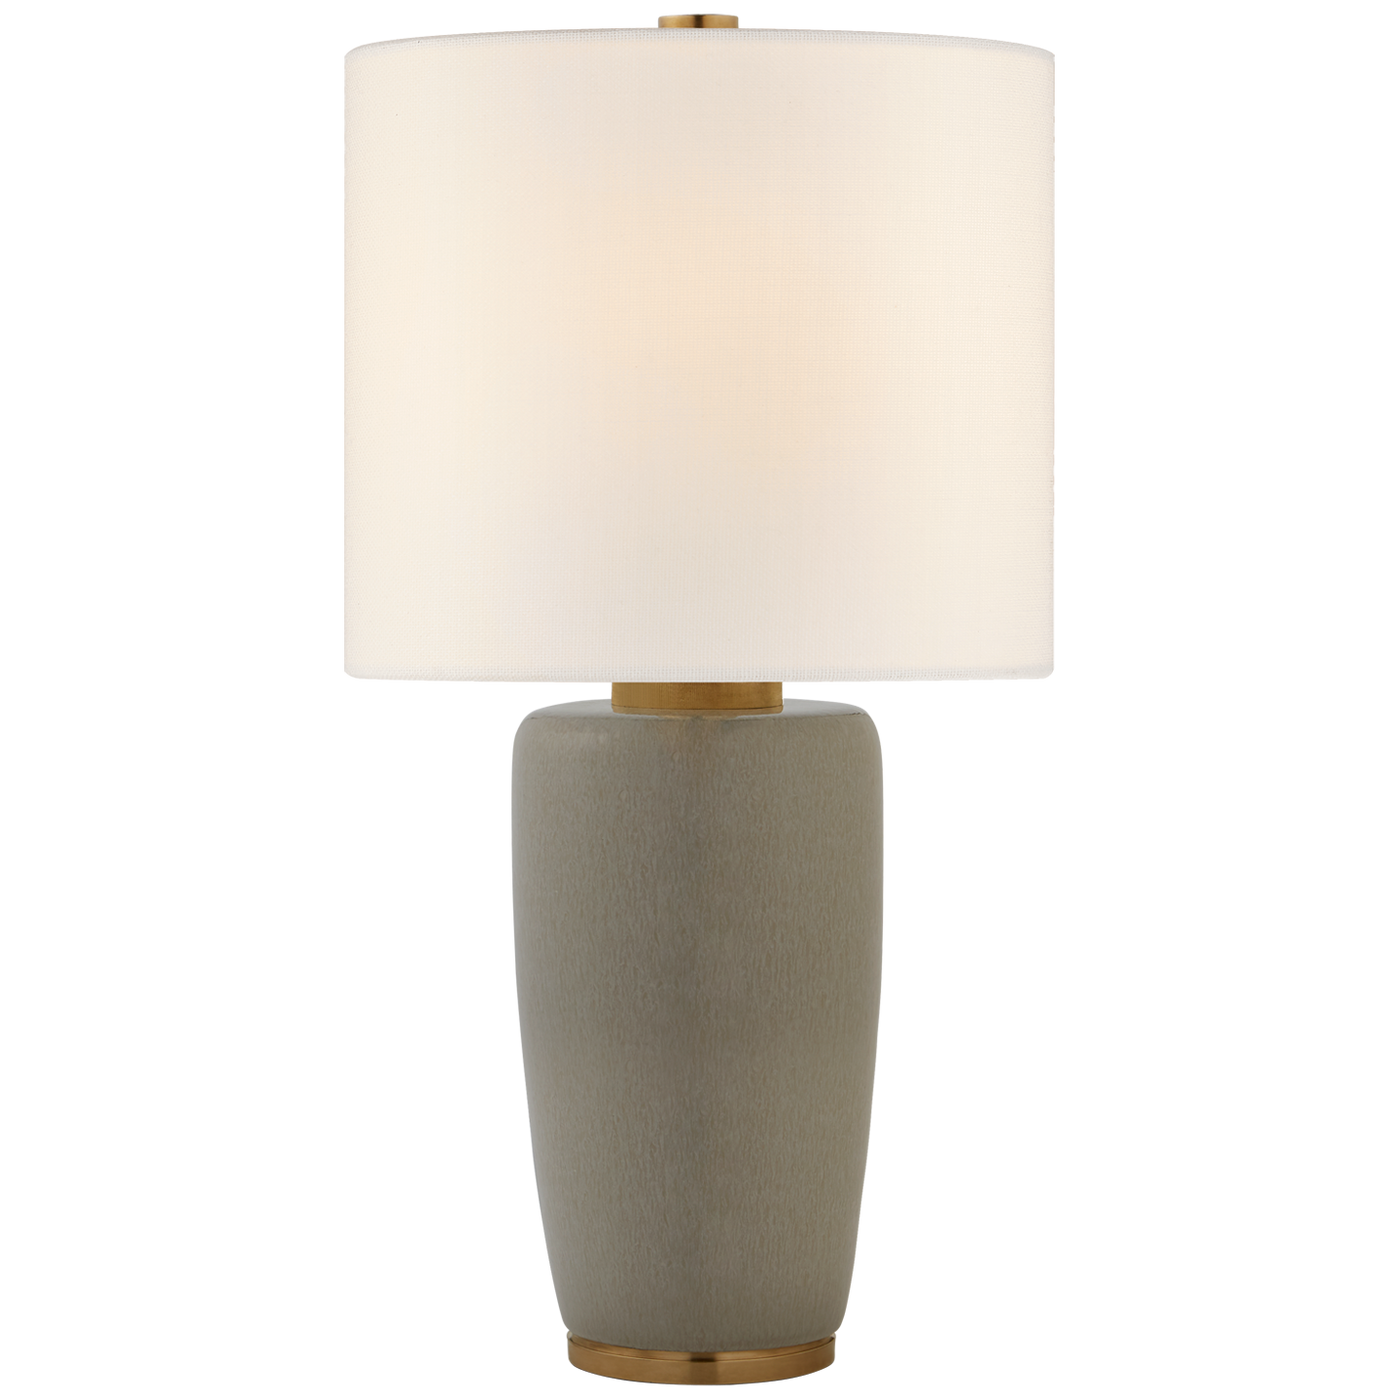 TABLE LAMP ROUND BASE LARGE (Available in 2 Finishes)